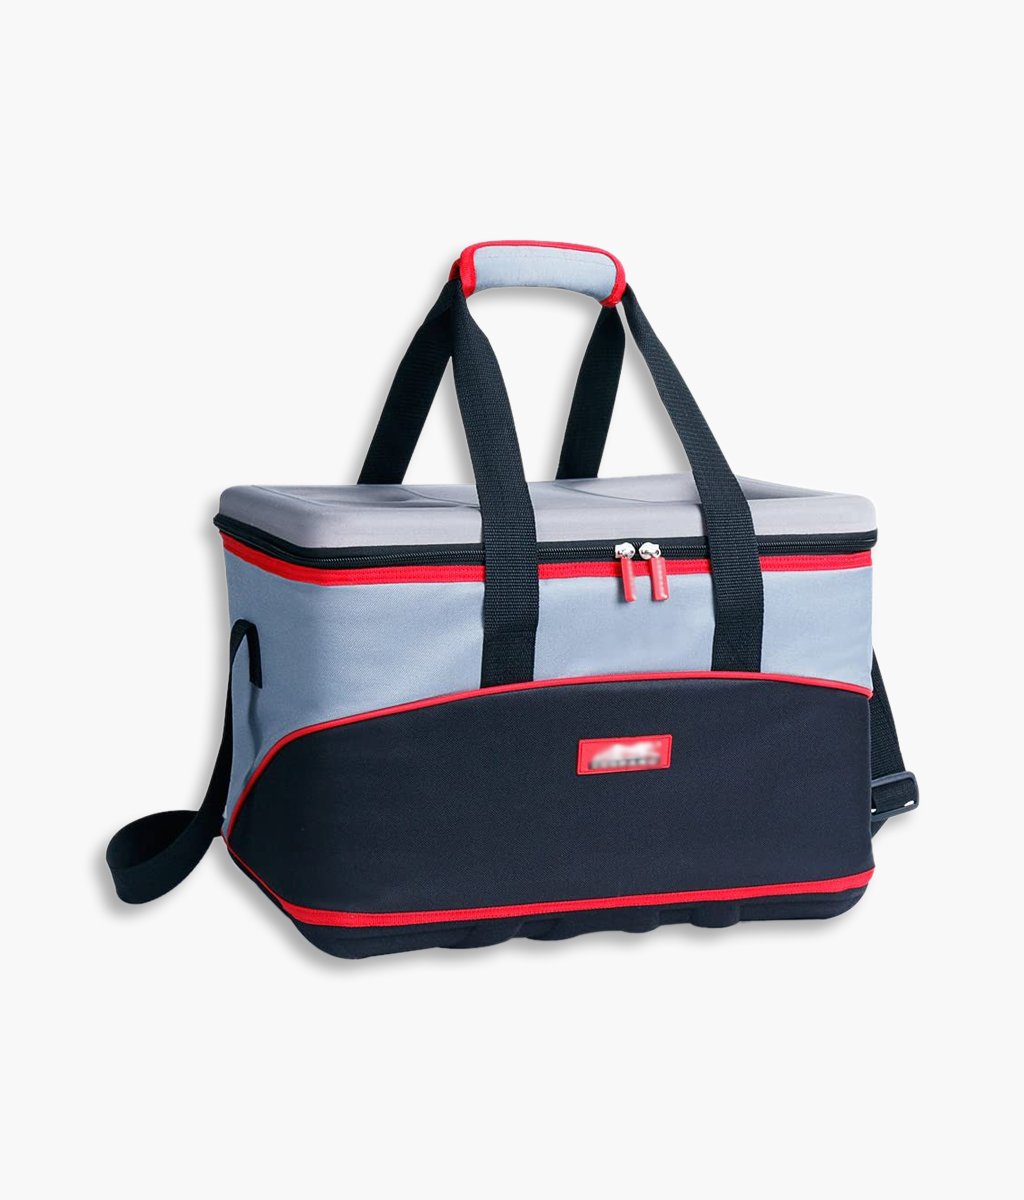 Outdoor Soft Insulated Cooler Bag 24/48 Cans Featured Image